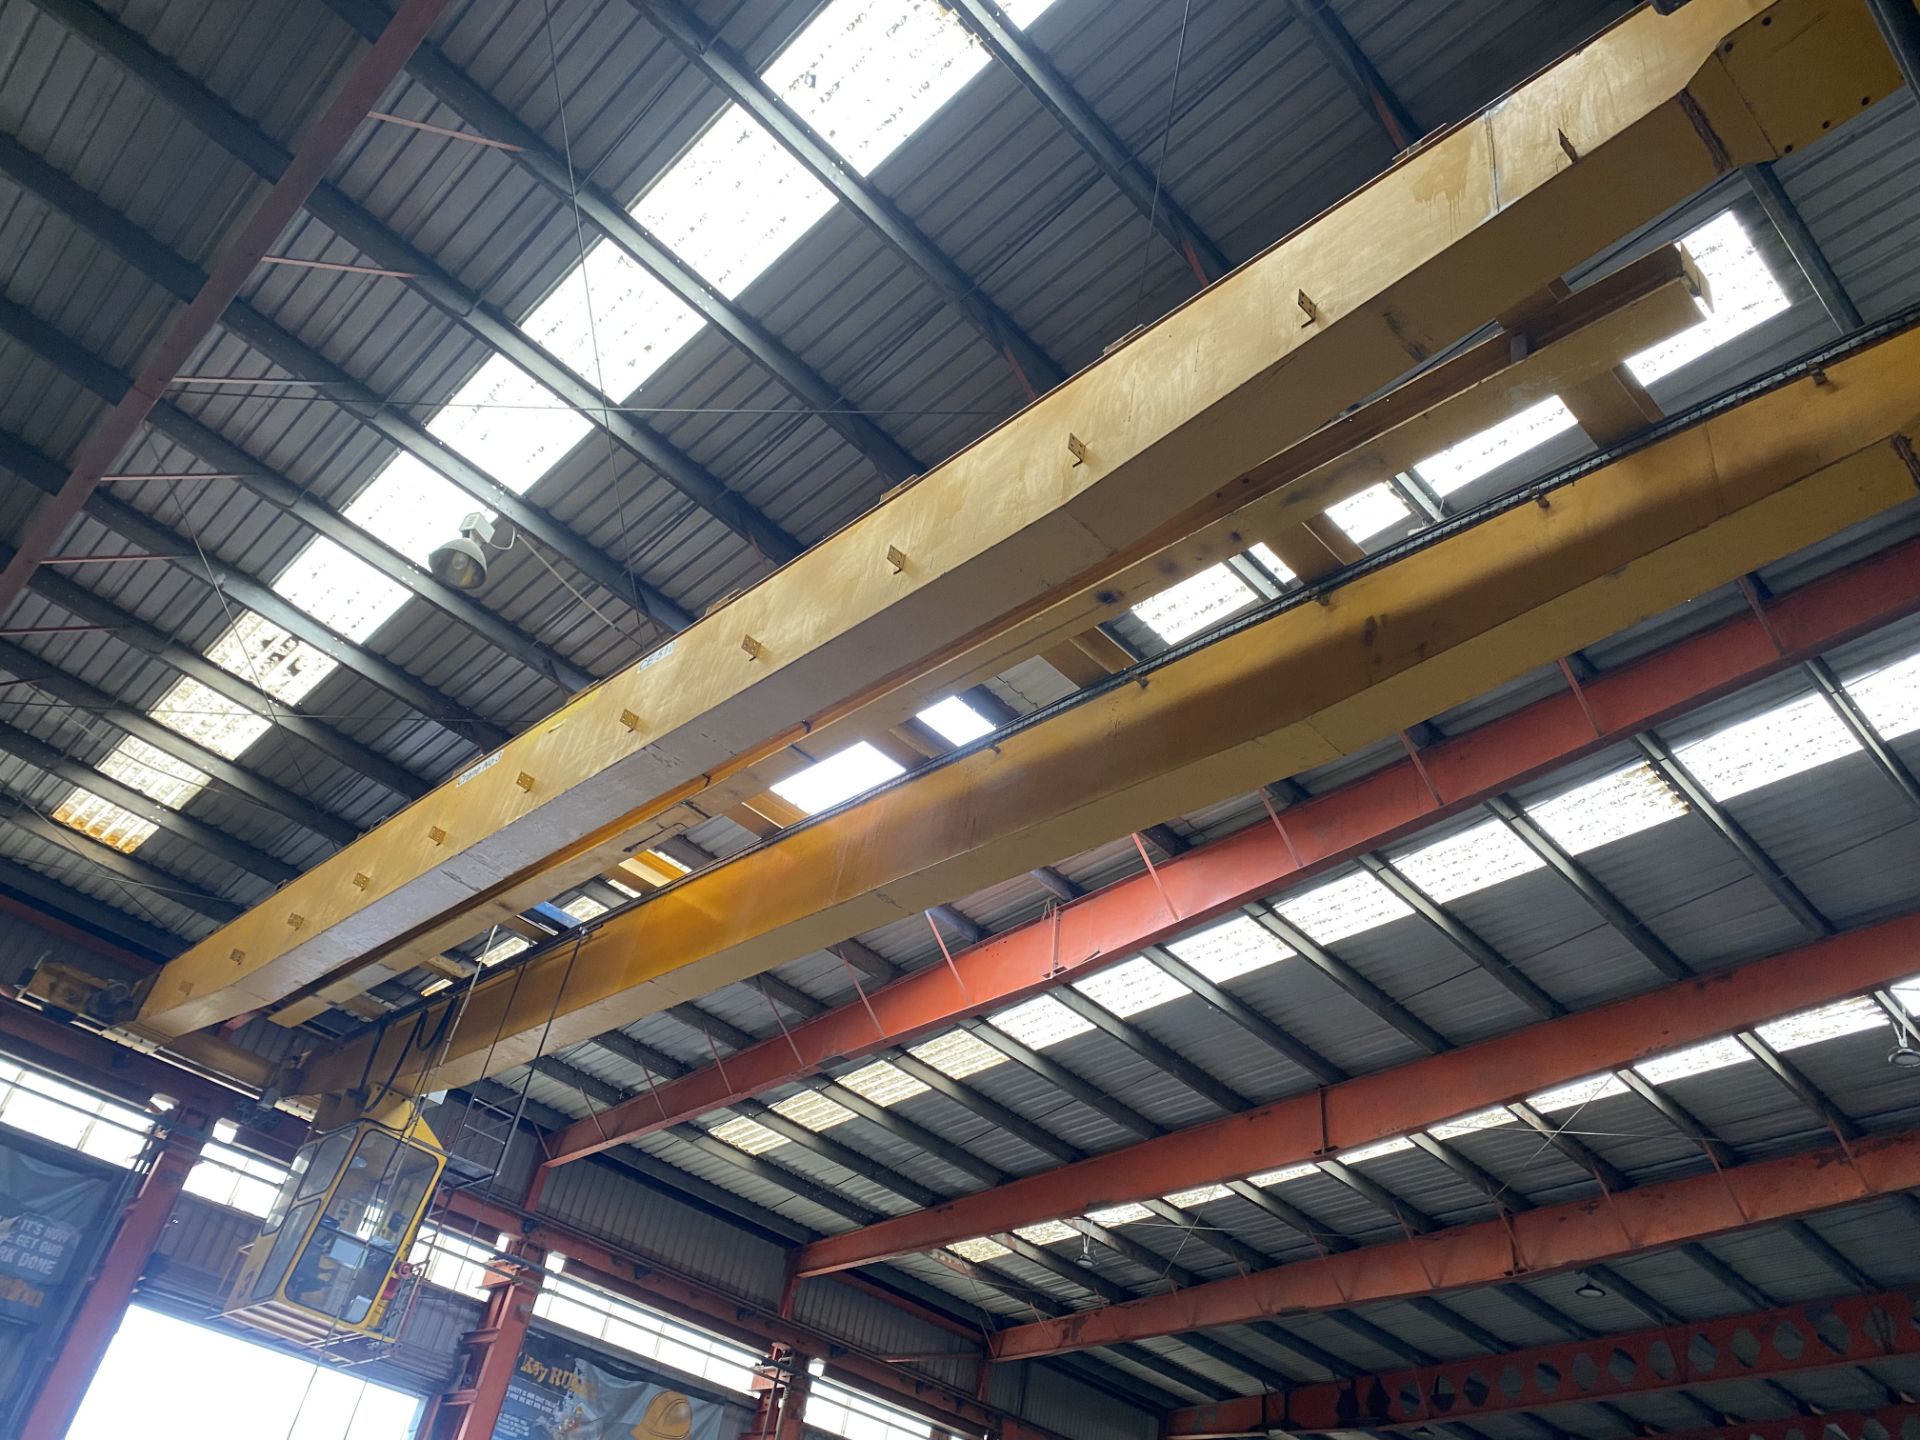 SWL 2 x 15T TWIN GIRDER TRAVELLING OVERHEAD CRANE, CE510 (crane no. 3), approx. 19m span, ( - Image 3 of 5